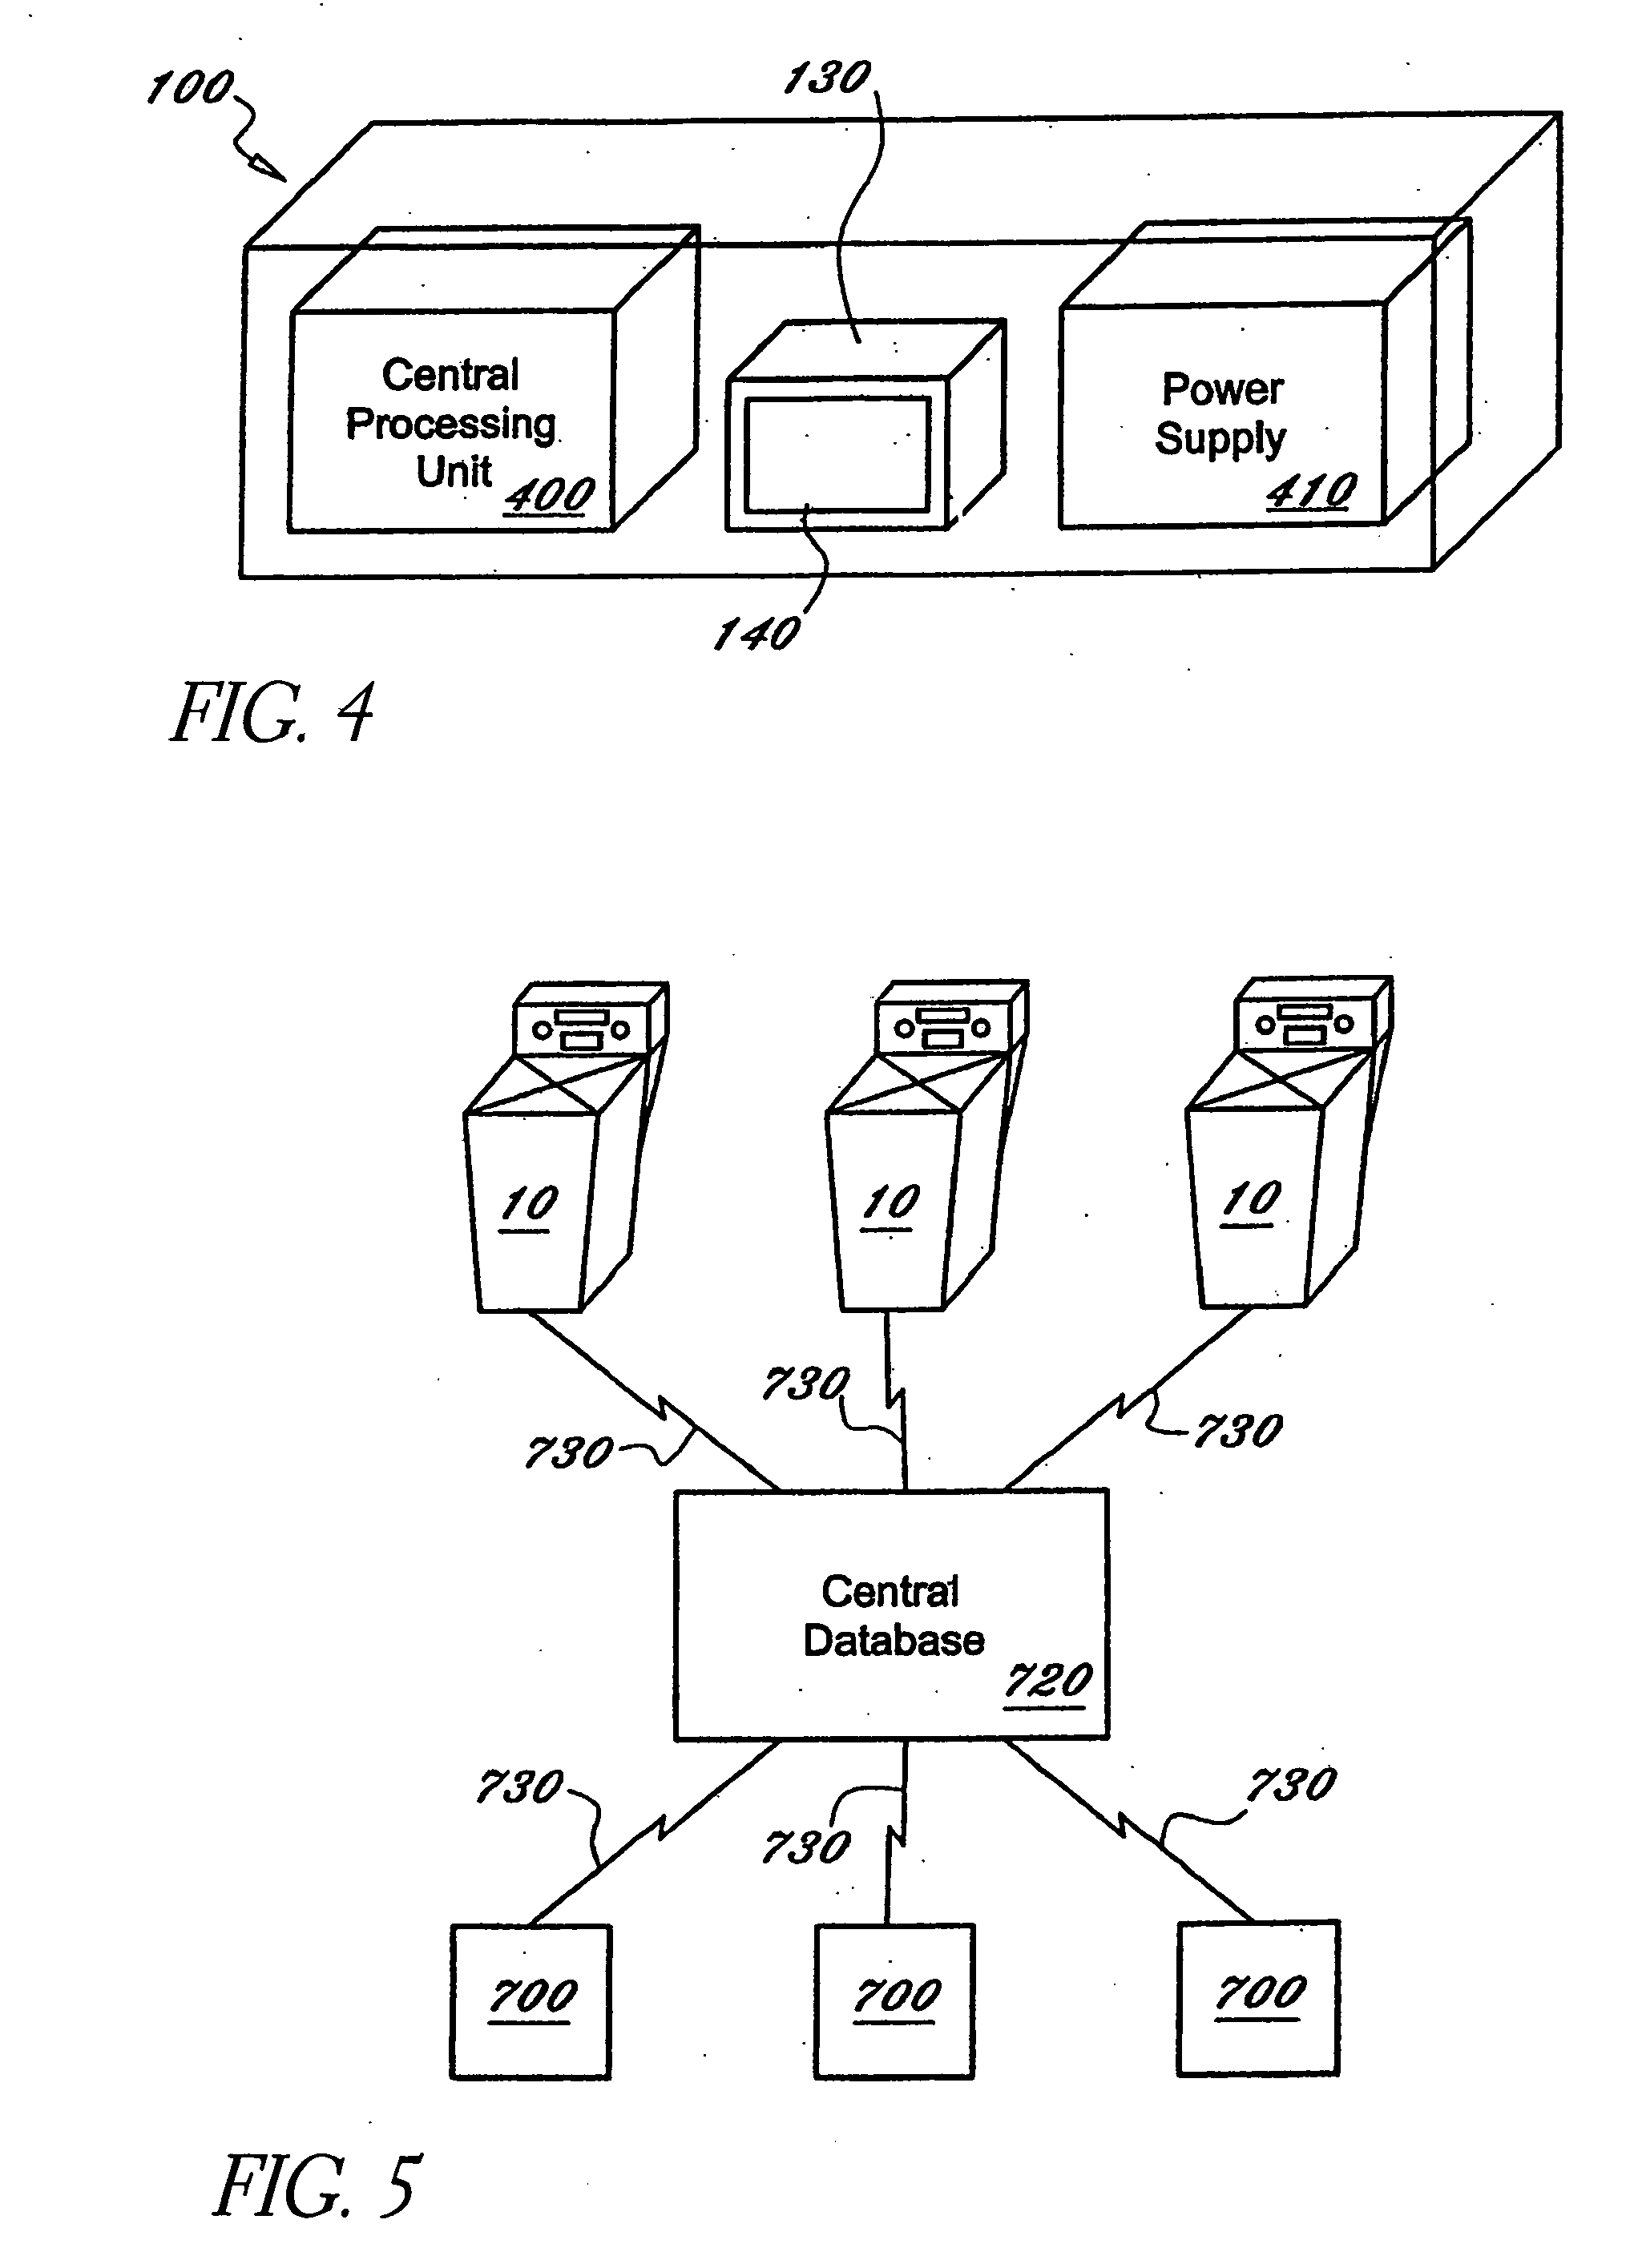 Networked disposal and sample provisioning apparatus